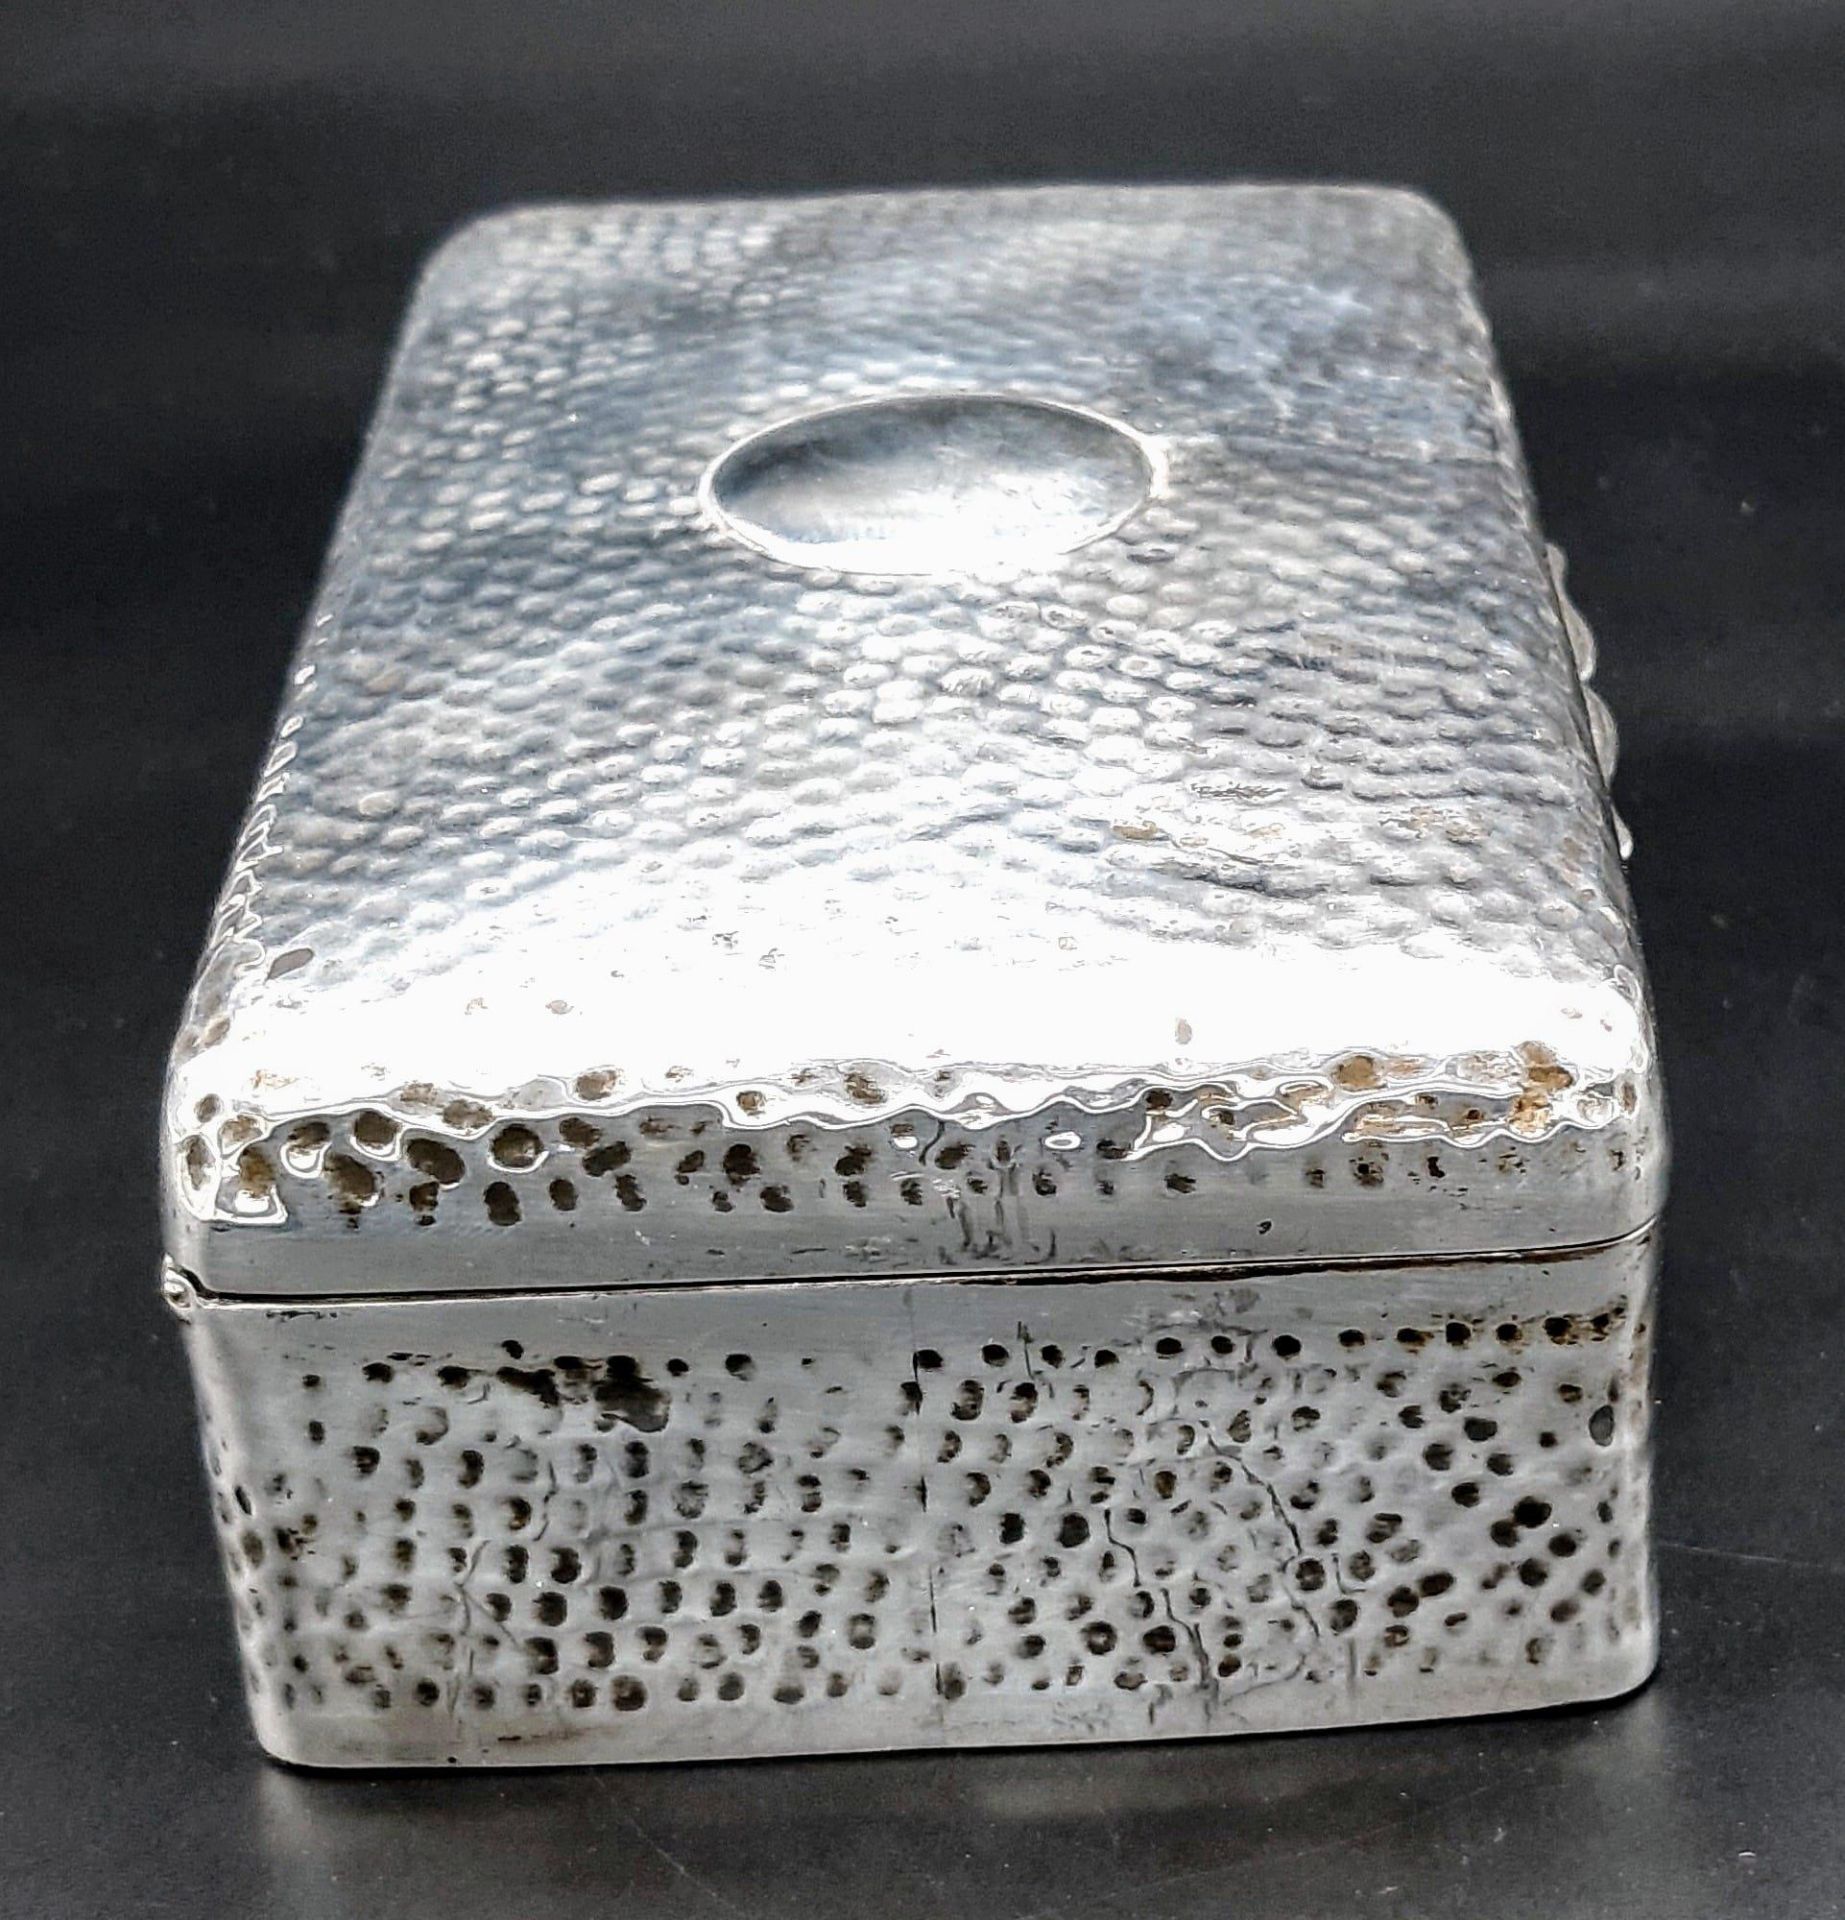 A Wonderful Antique Sterling Silver Cigarette, Cheroot Case. Dimpled silver exterior with a good - Image 4 of 8